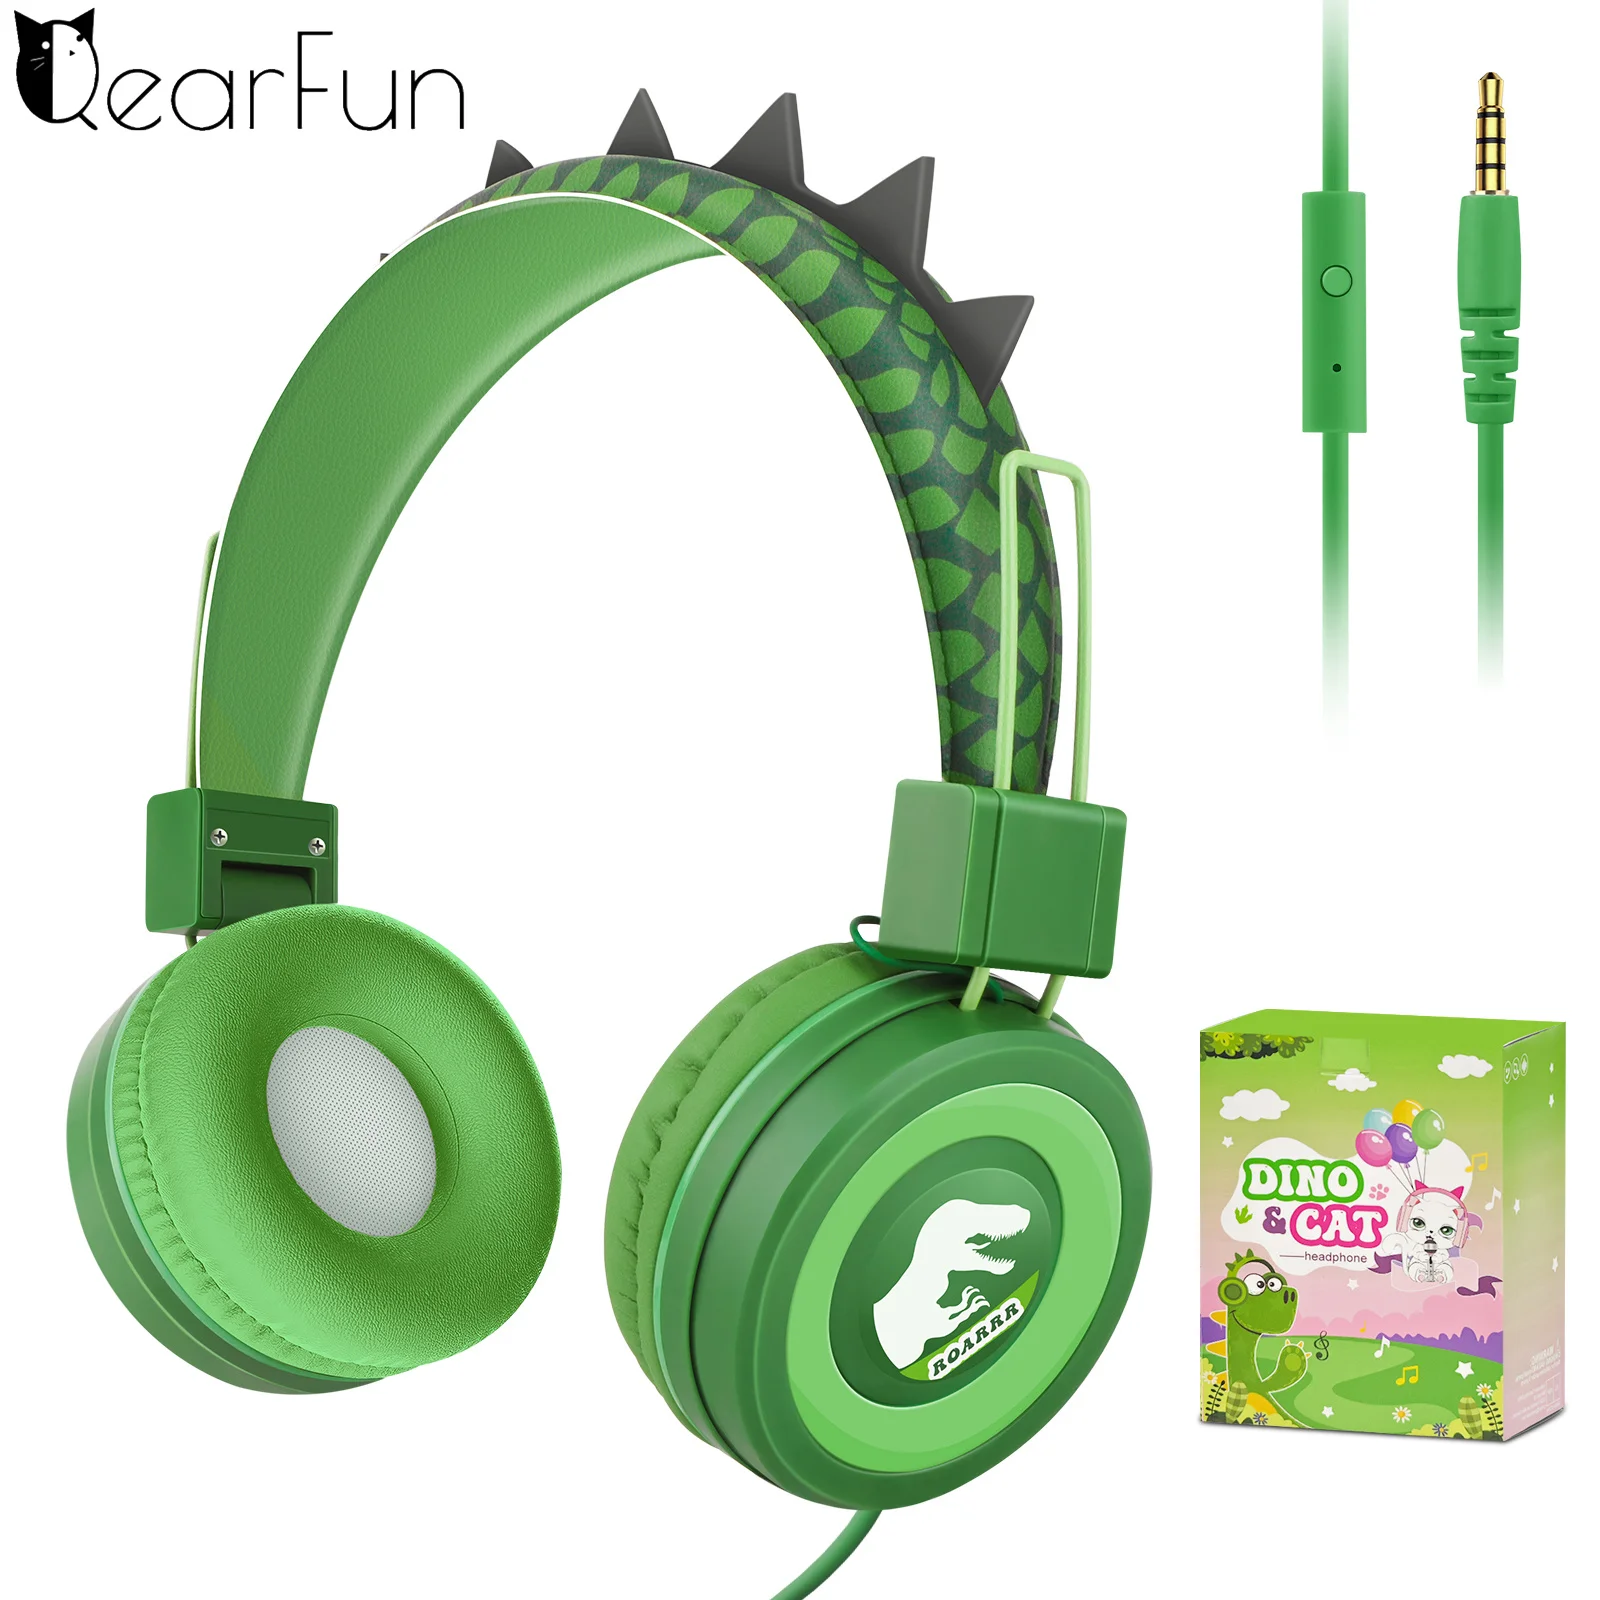 

Cute Dinosaur Kids Headphones With Mic Safe Volume 85db Stereo Sound Wired Children Headphones for Ipad Computer Kids Gifts